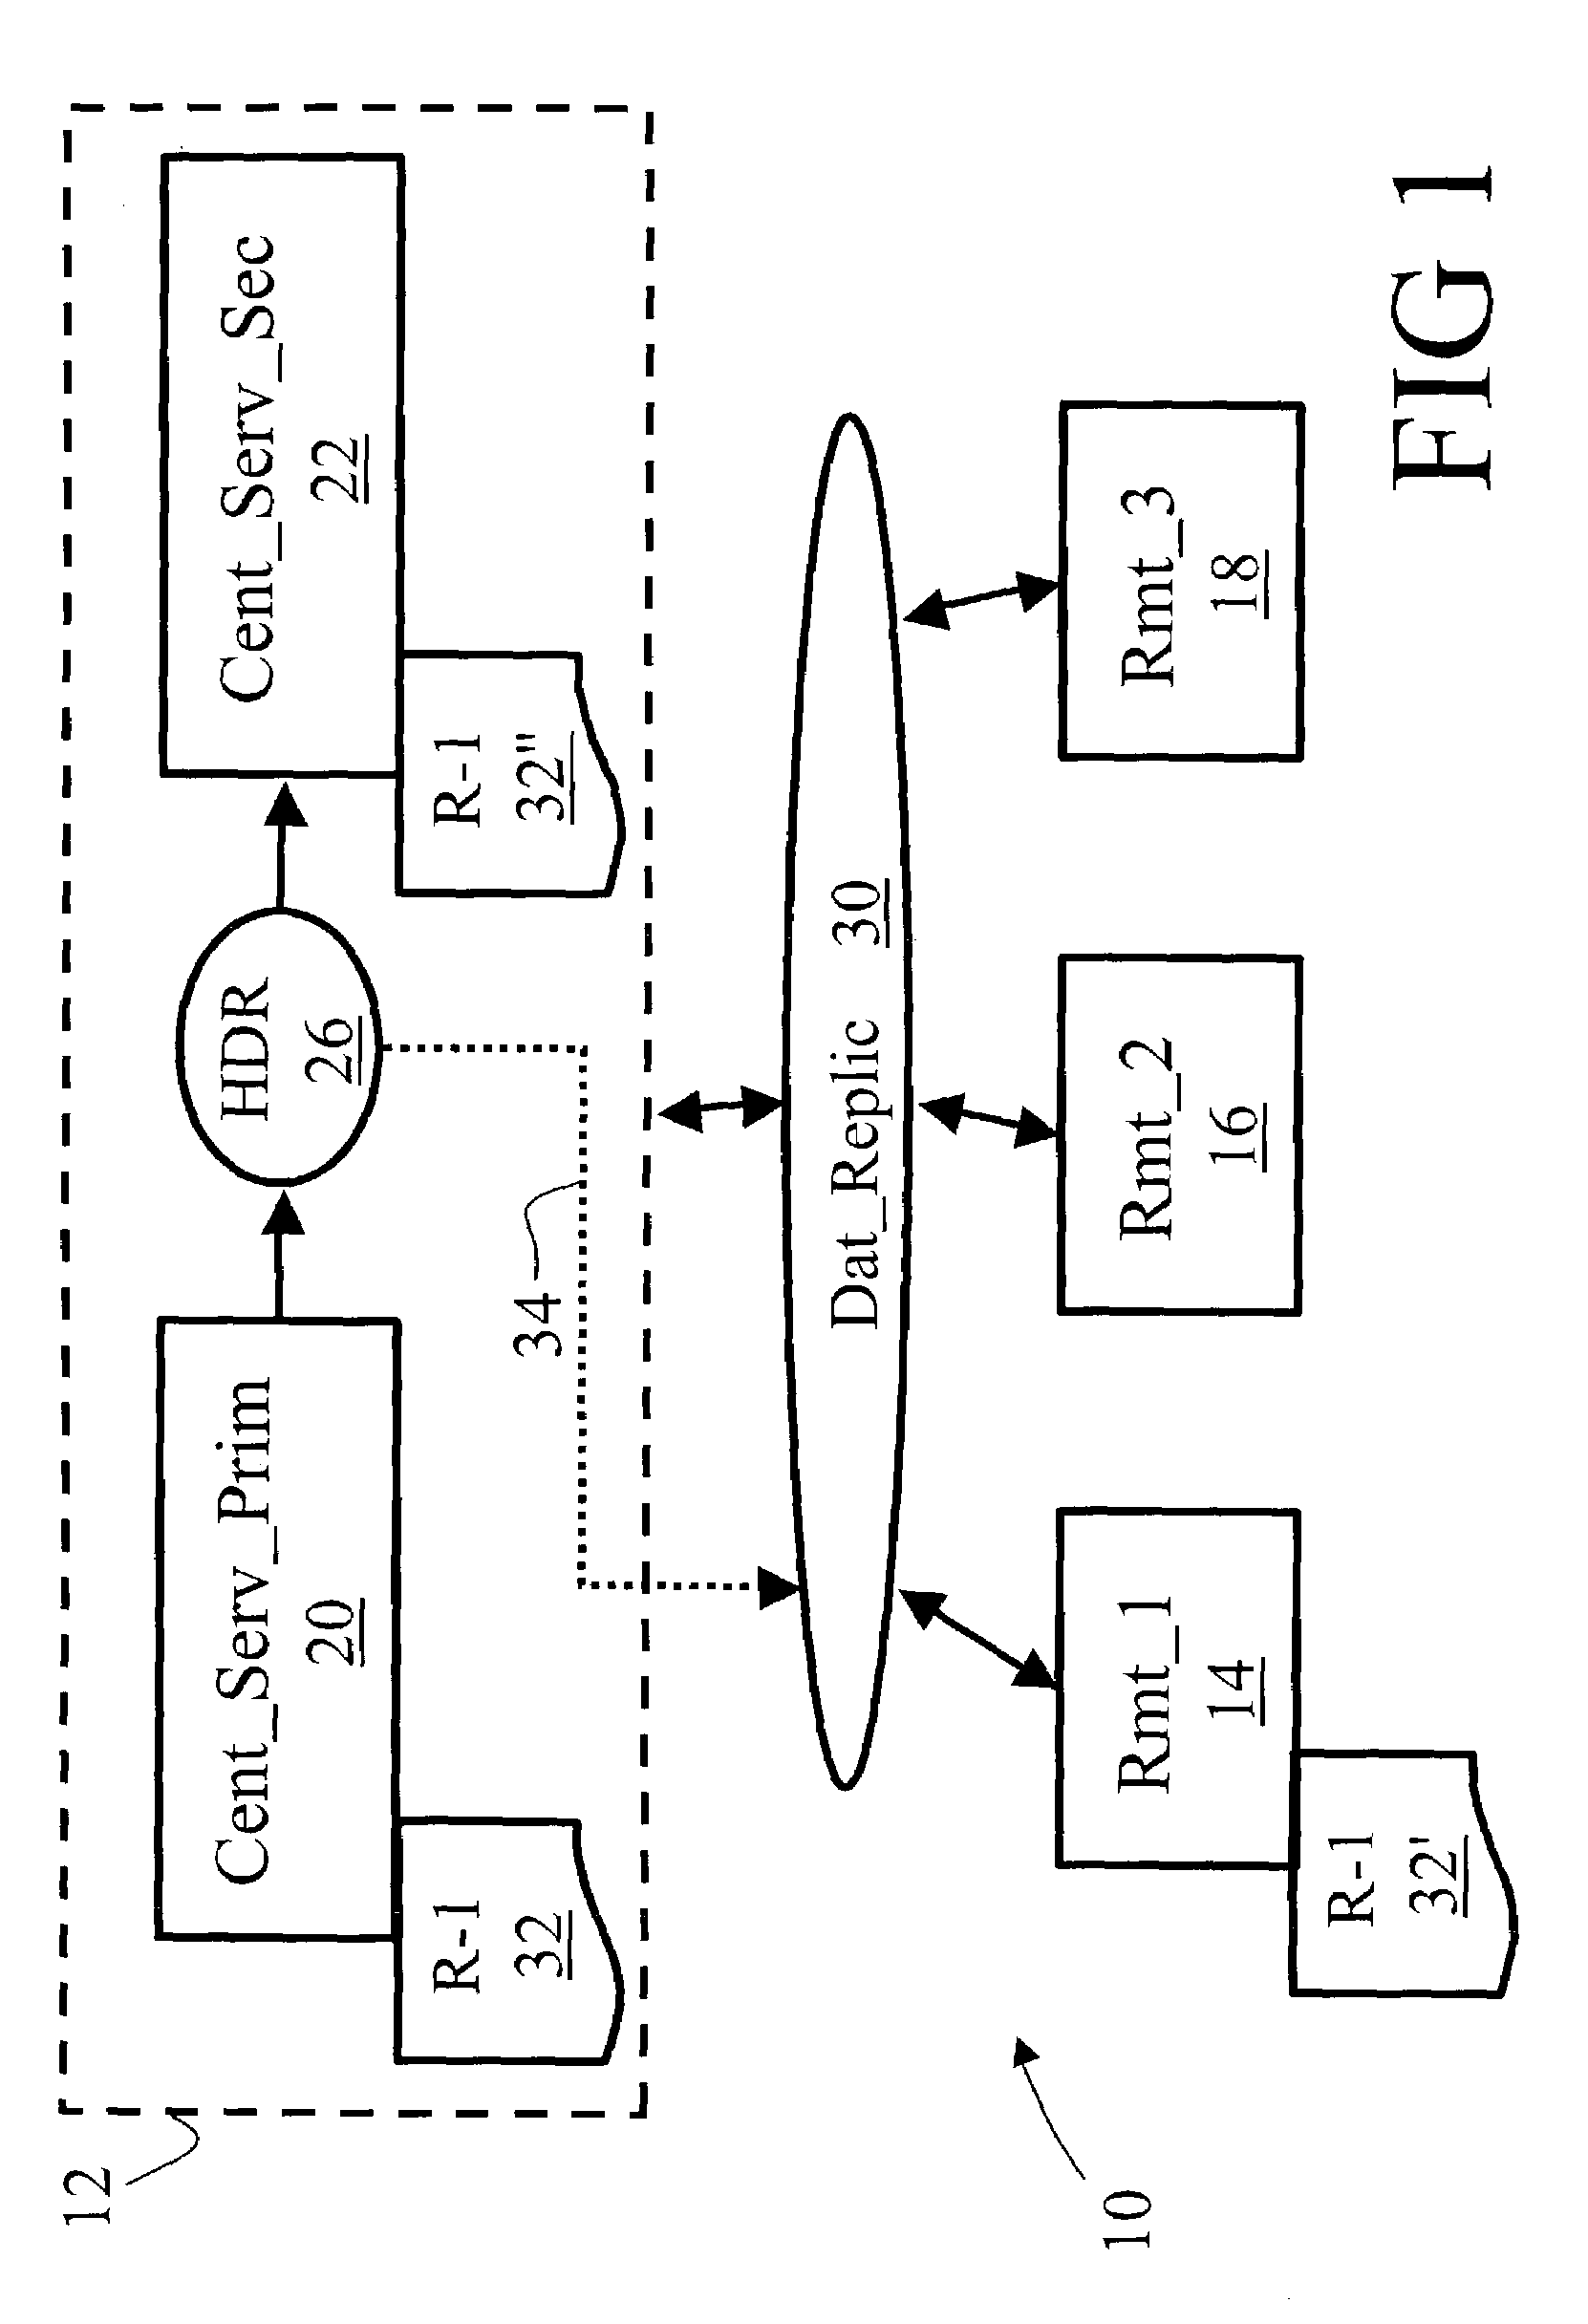 Apparatus and method for coordinating logical data replication with highly available data replication